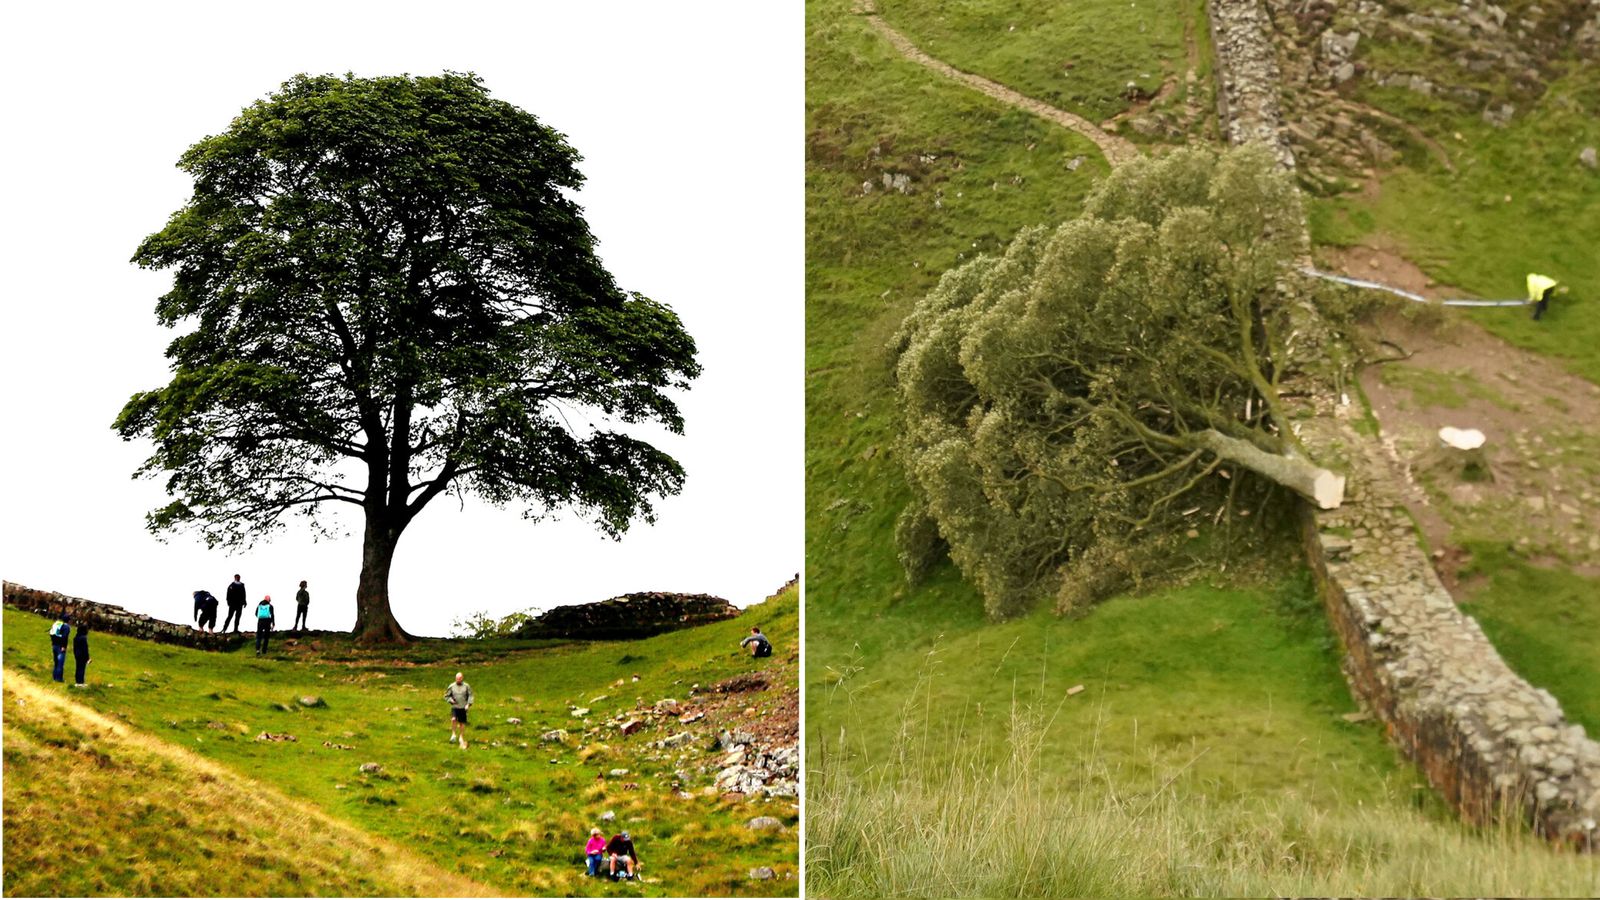 Sycamore Gap: Boy arrested after world-famous tree cut down is released on bail